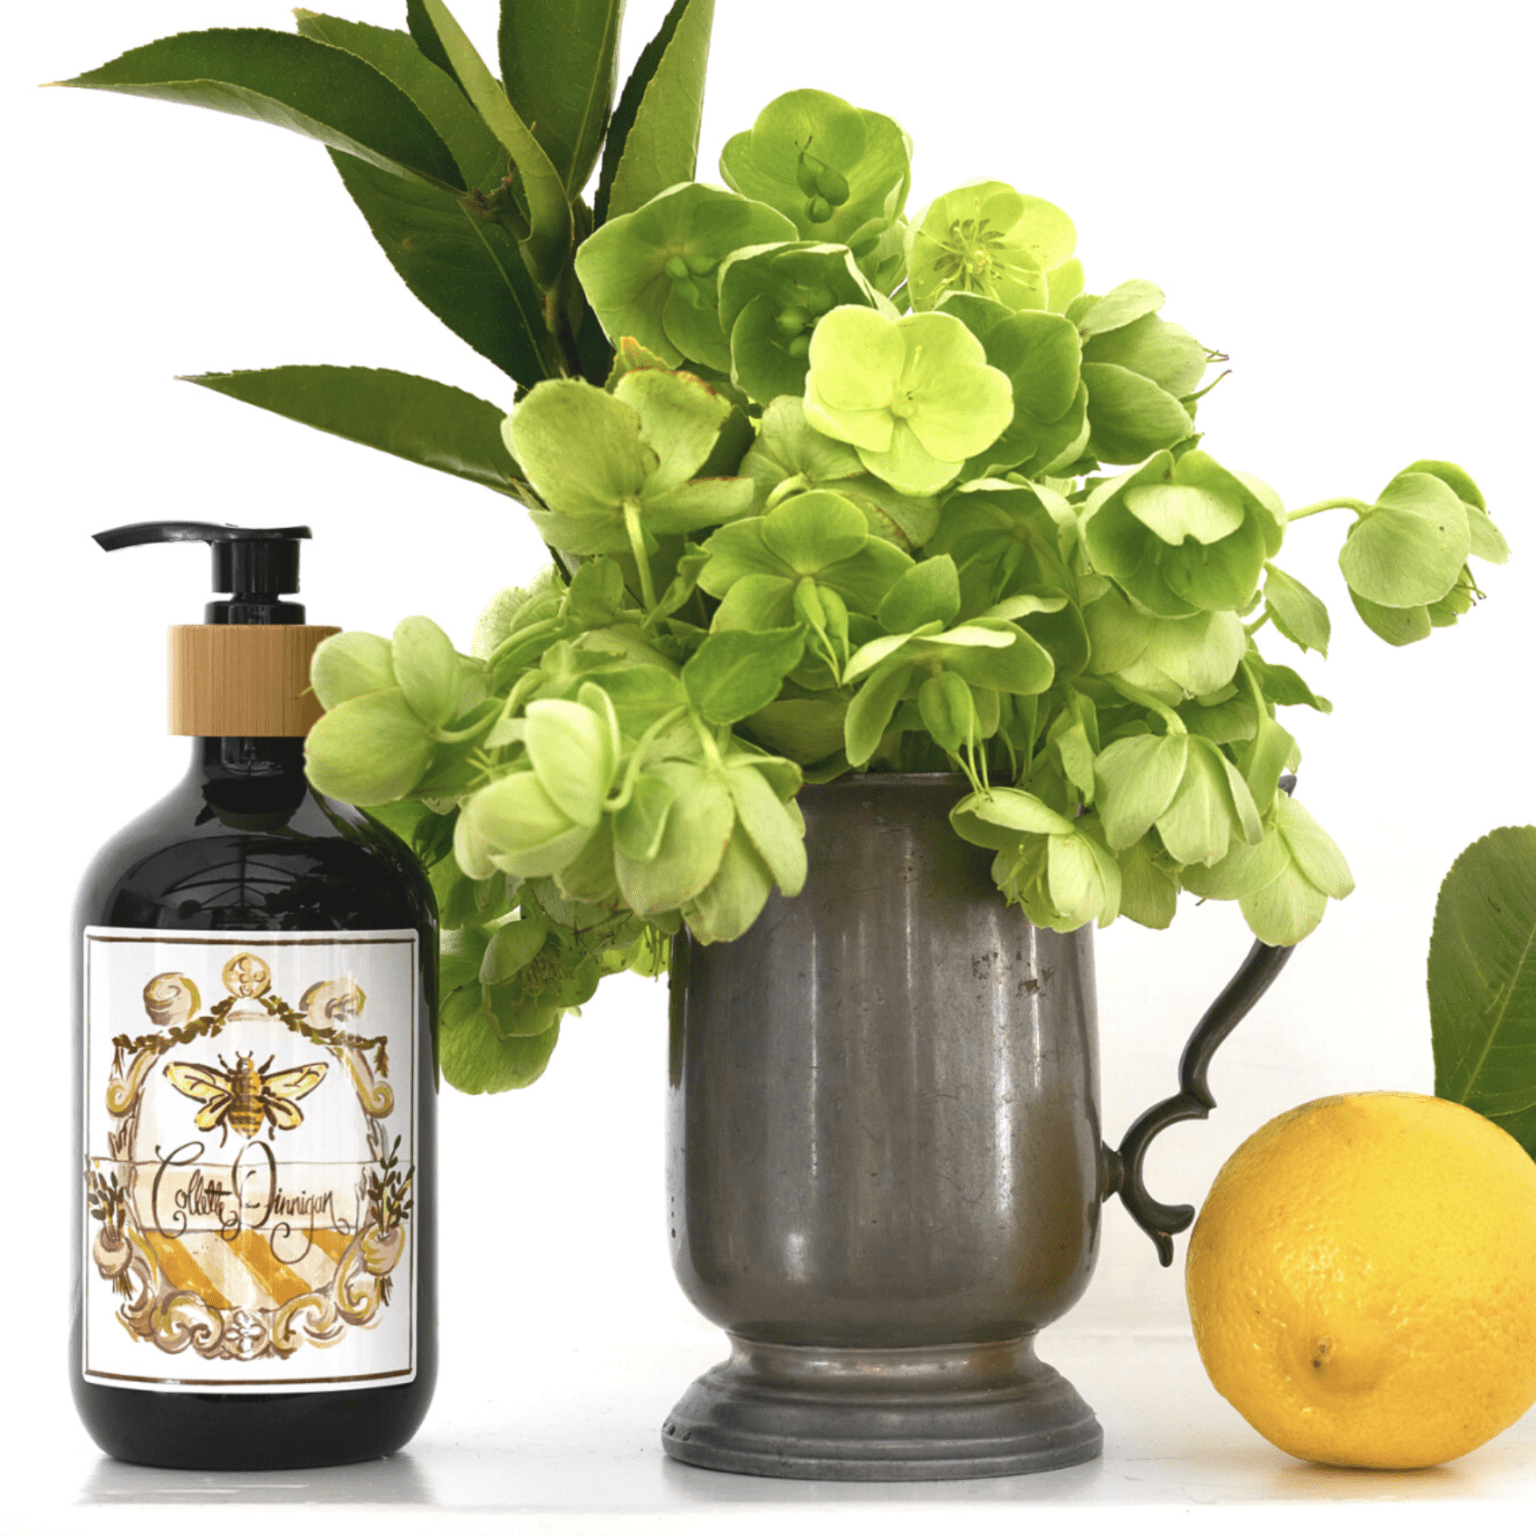 Collette Dinnigan Hand Cream Inspired by Italy made in Australia Limoni